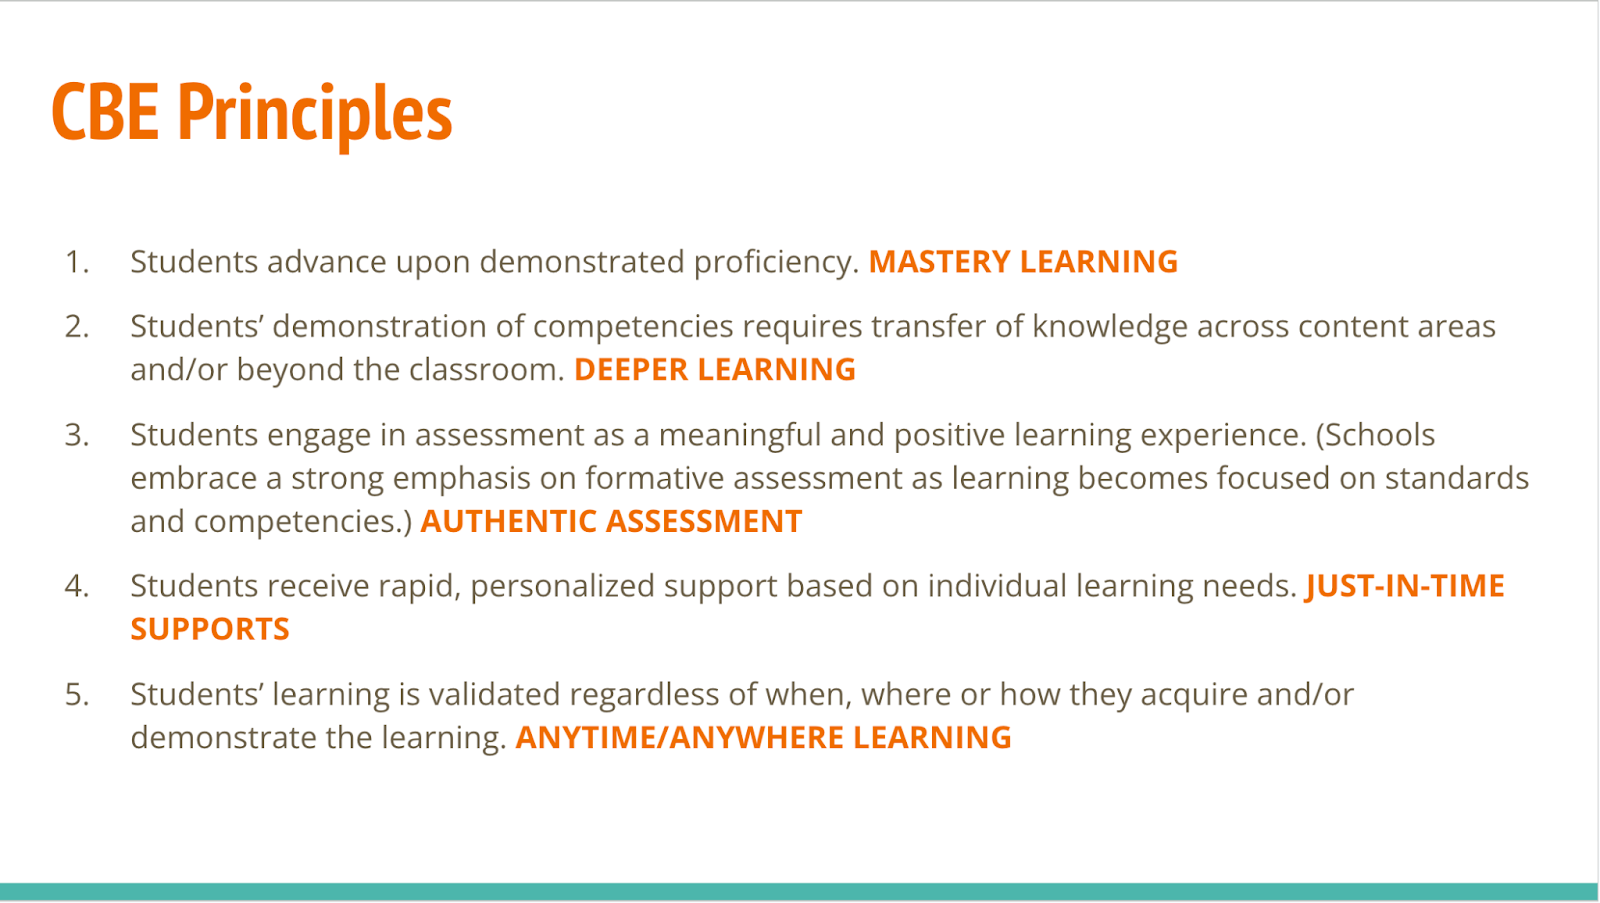 Photo states the 5 key componets of CBE Principles with bolded orange text for major topics, and key words.